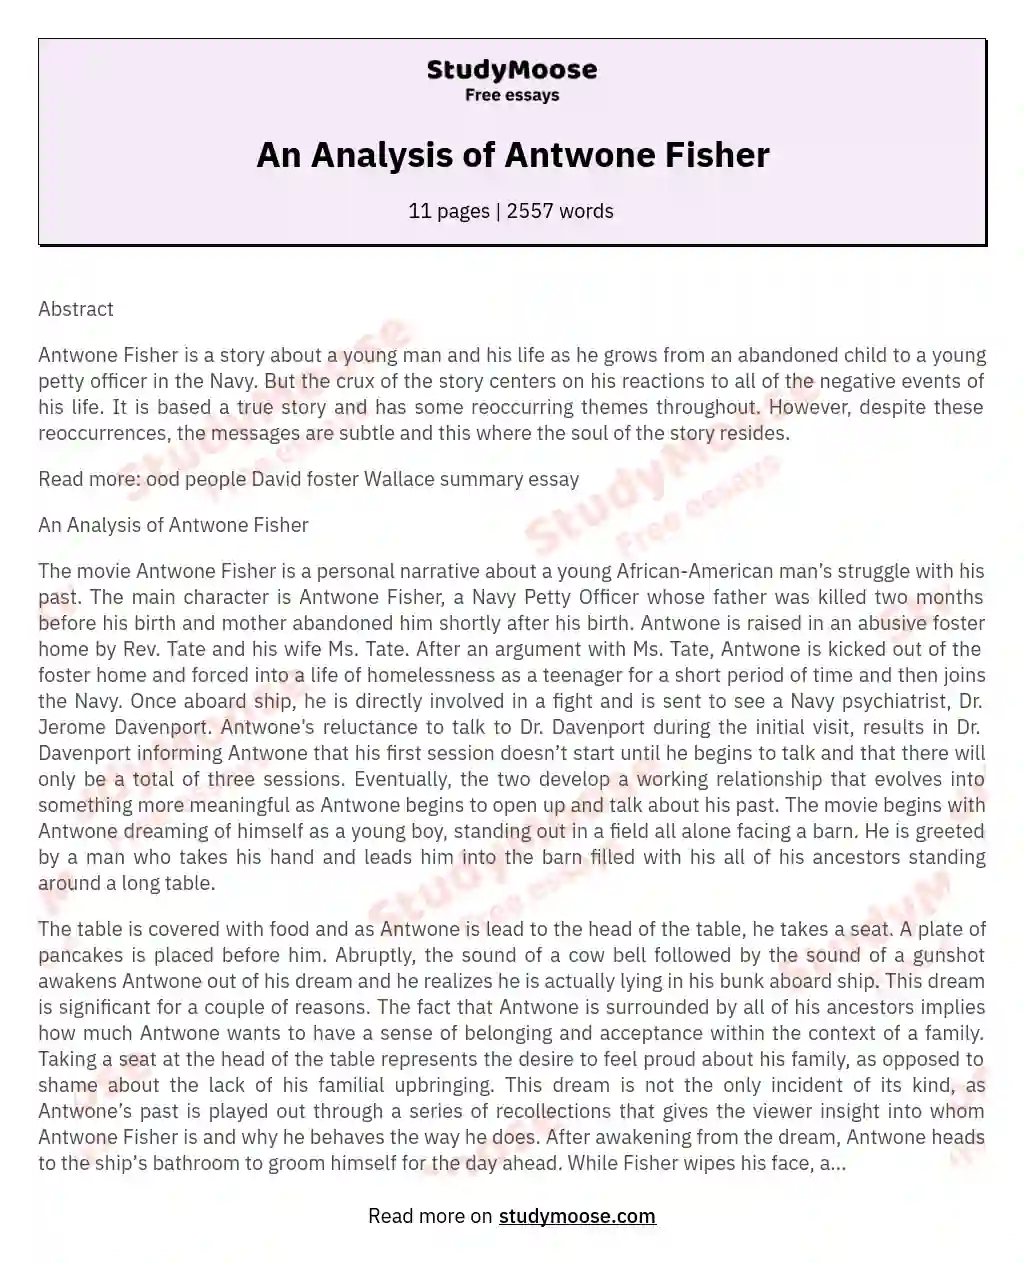 An Analysis of Antwone Fisher essay